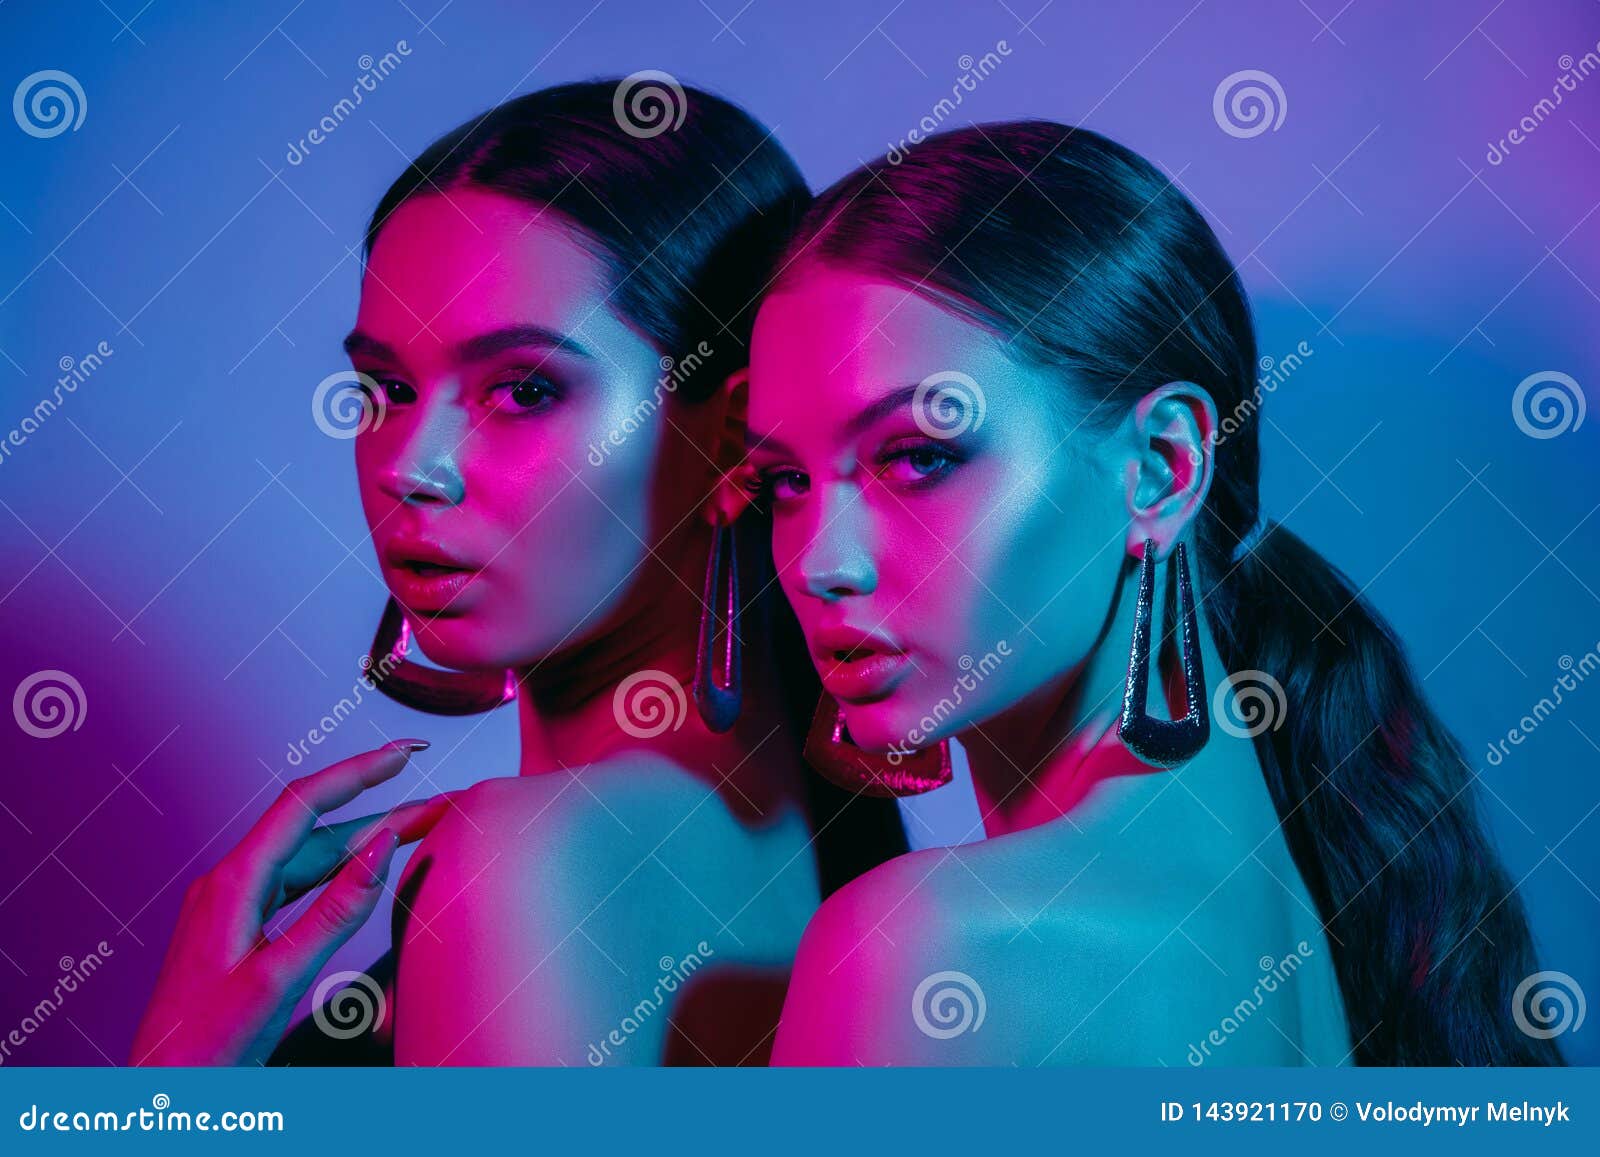 high fashion models in colorful bright neon lights posing at studio